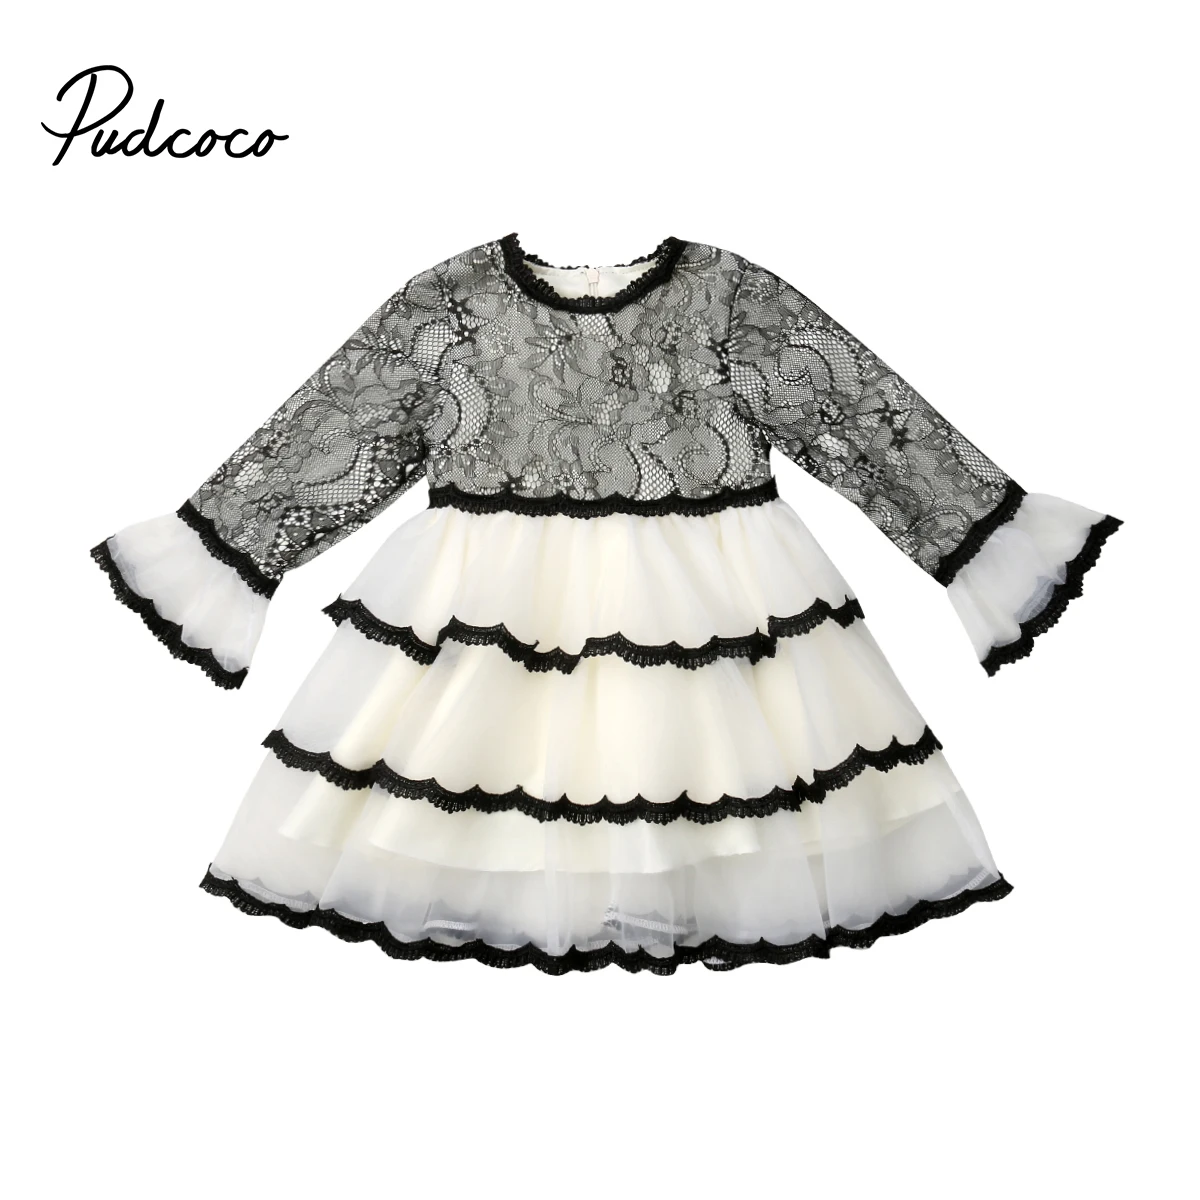 

Pudcoco Baby Girl Dress Lace Ruffles Princess Sundress 2019 New Baby Clothes Long Sleeve Pageant Bridesmaid Formal Dress